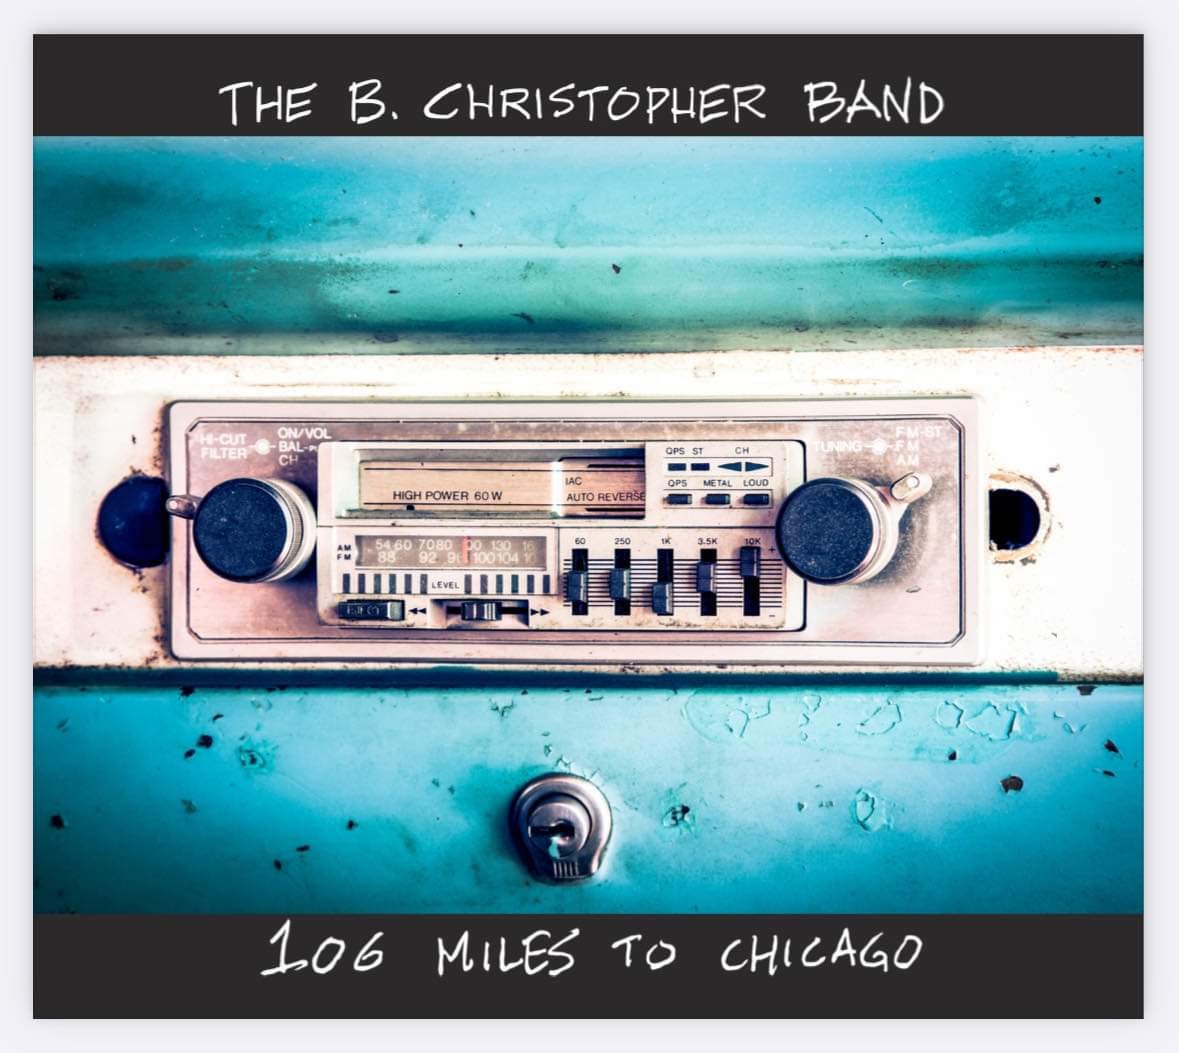 The B. Christopher Band - 106 Miles To Chicago